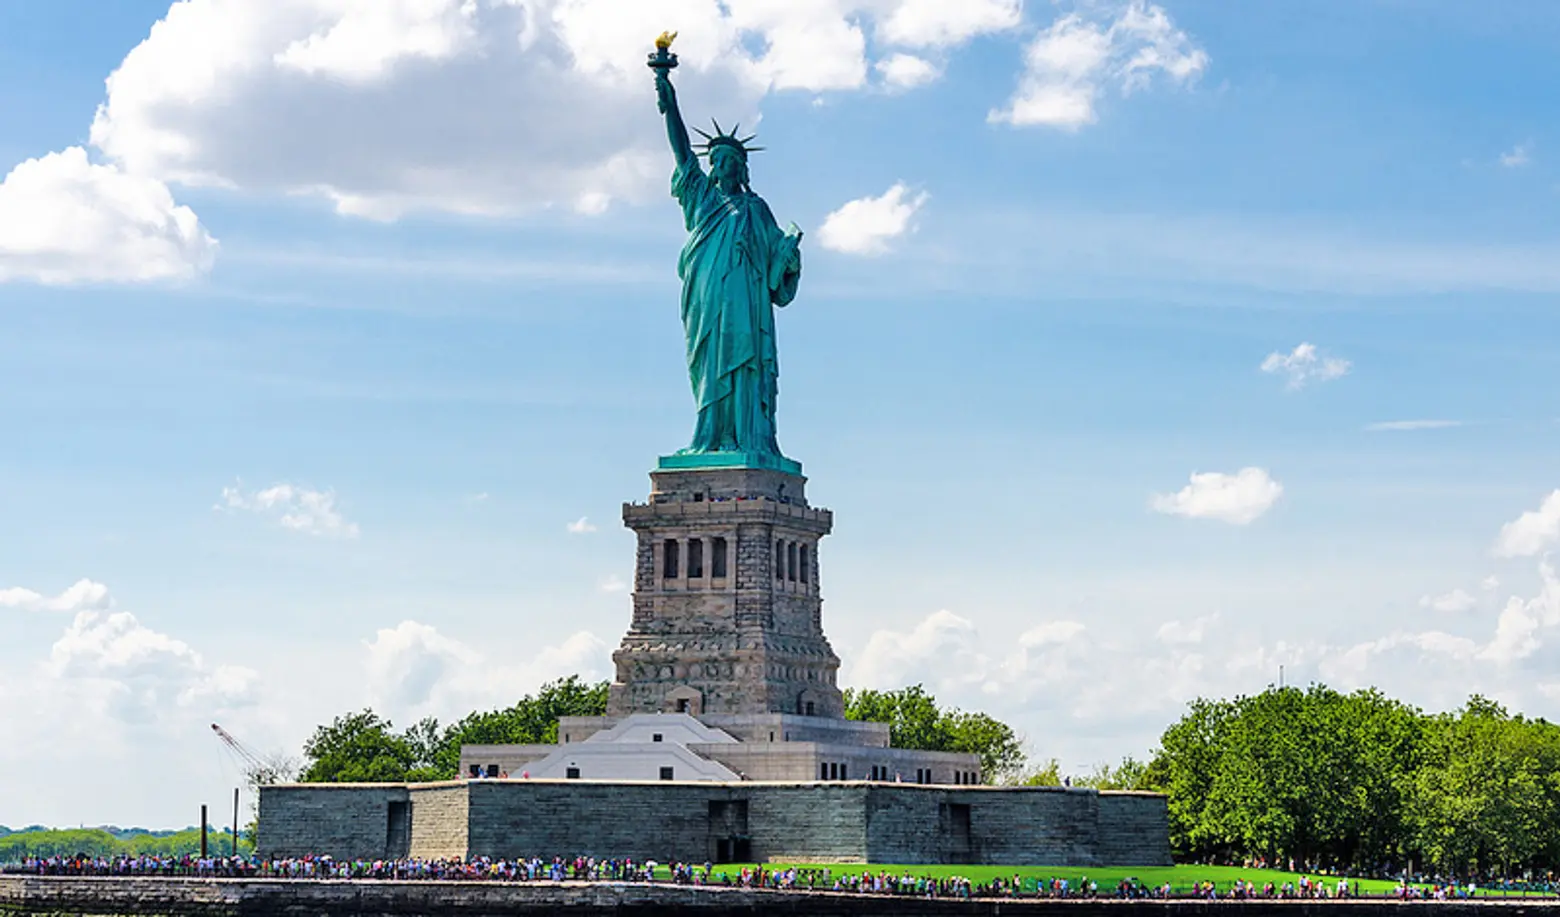 NJ Wants the Statue of Liberty on New Quarter; Union Square Station Gets ‘Walk of Shame’ Kiosk